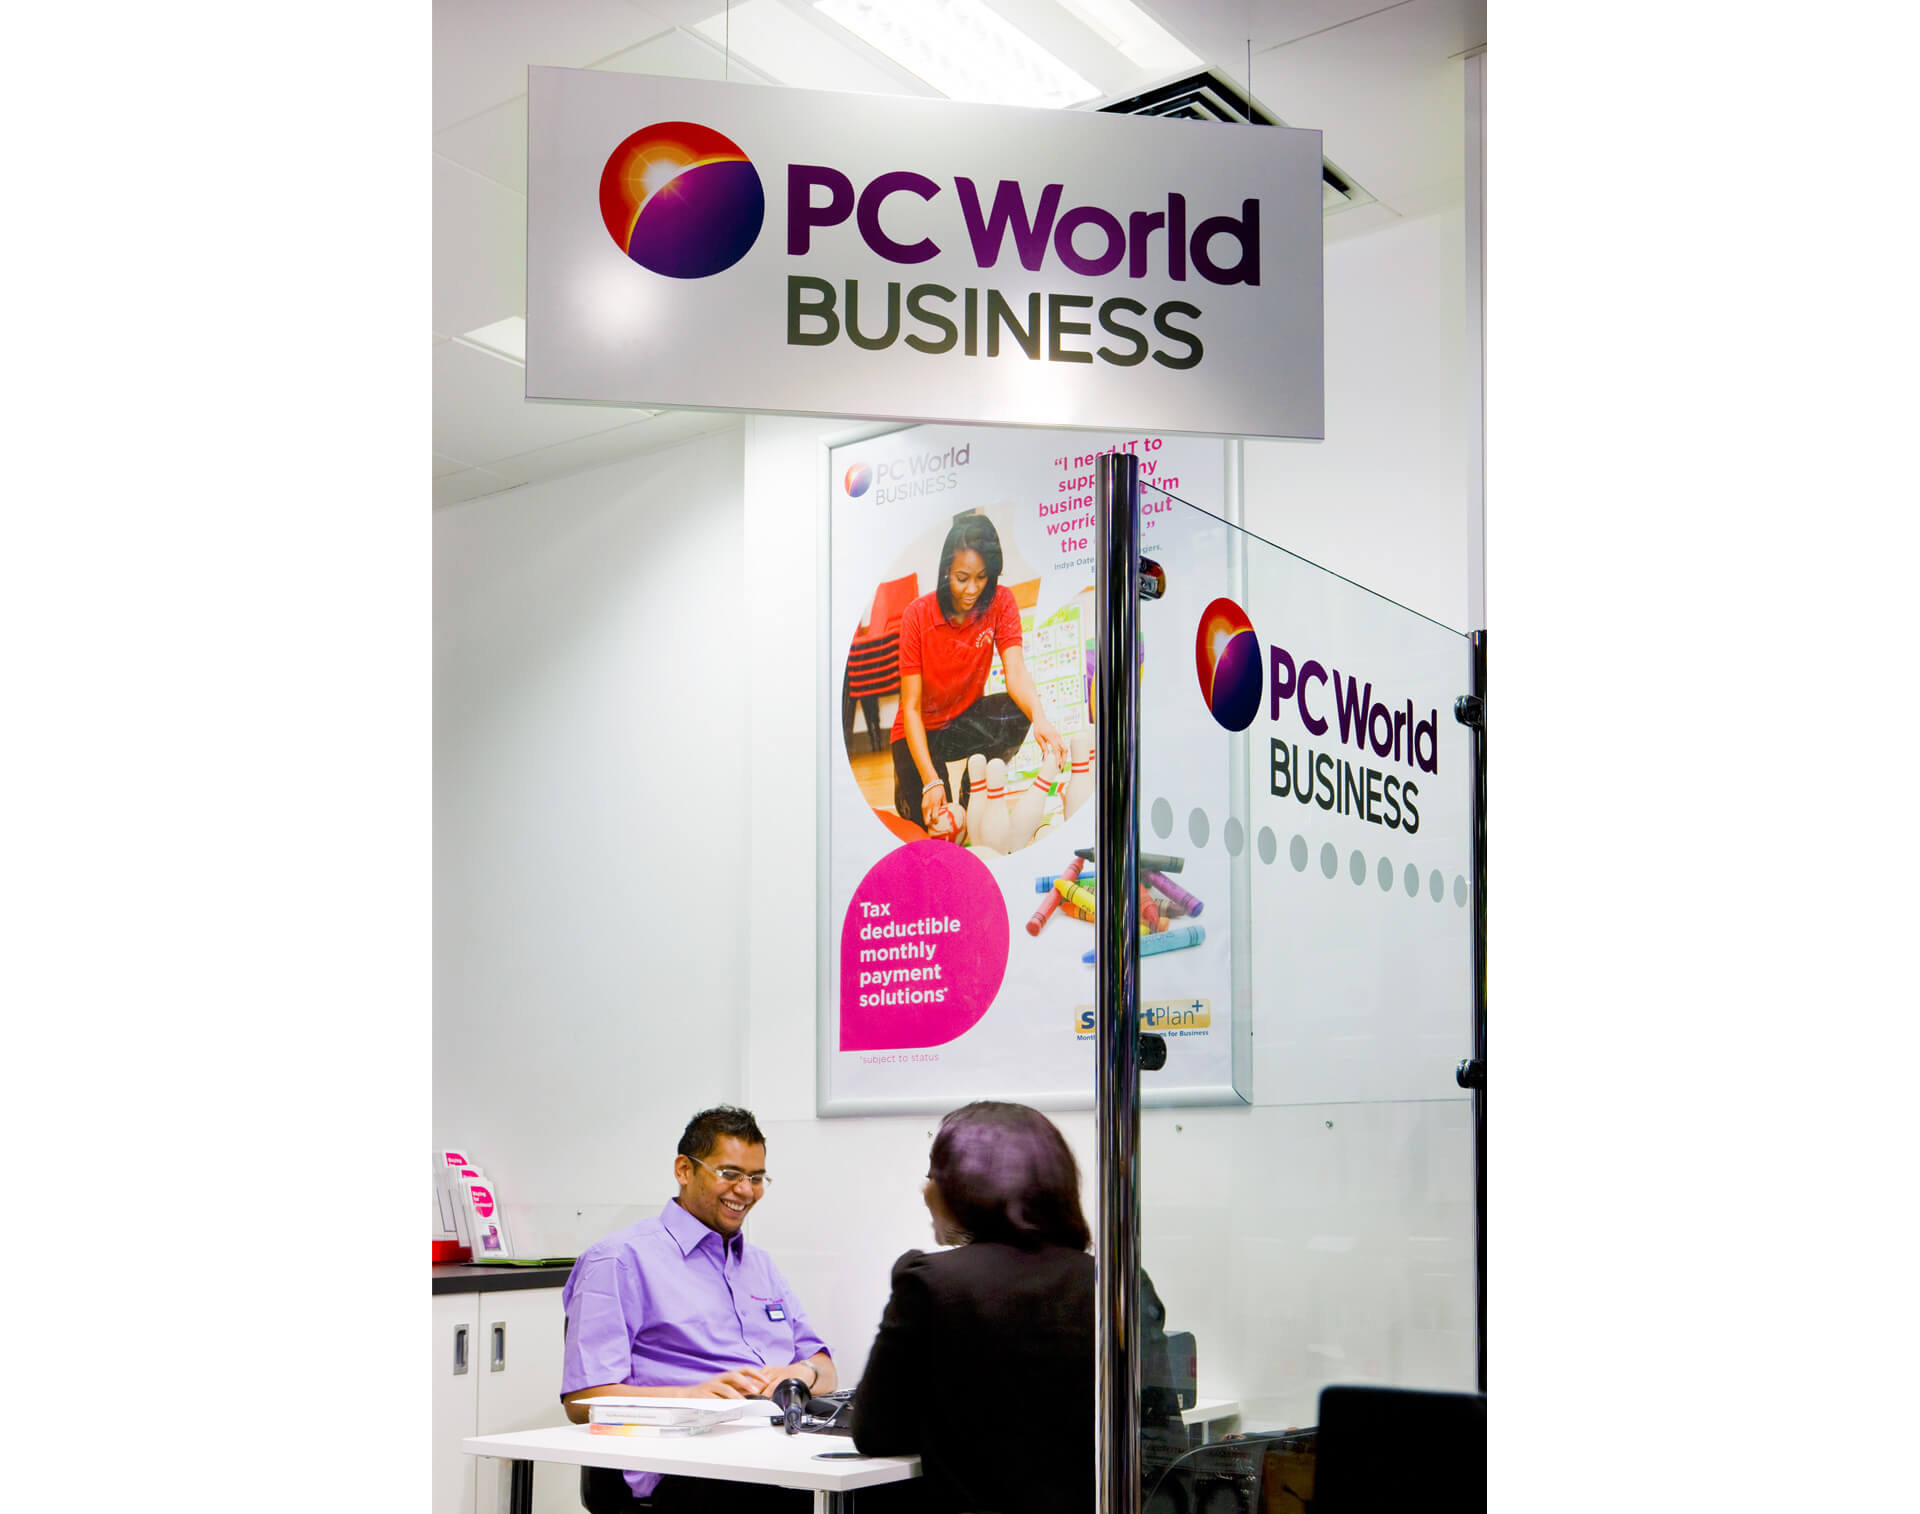 PC World Business branding, Point of sale material, design and communication